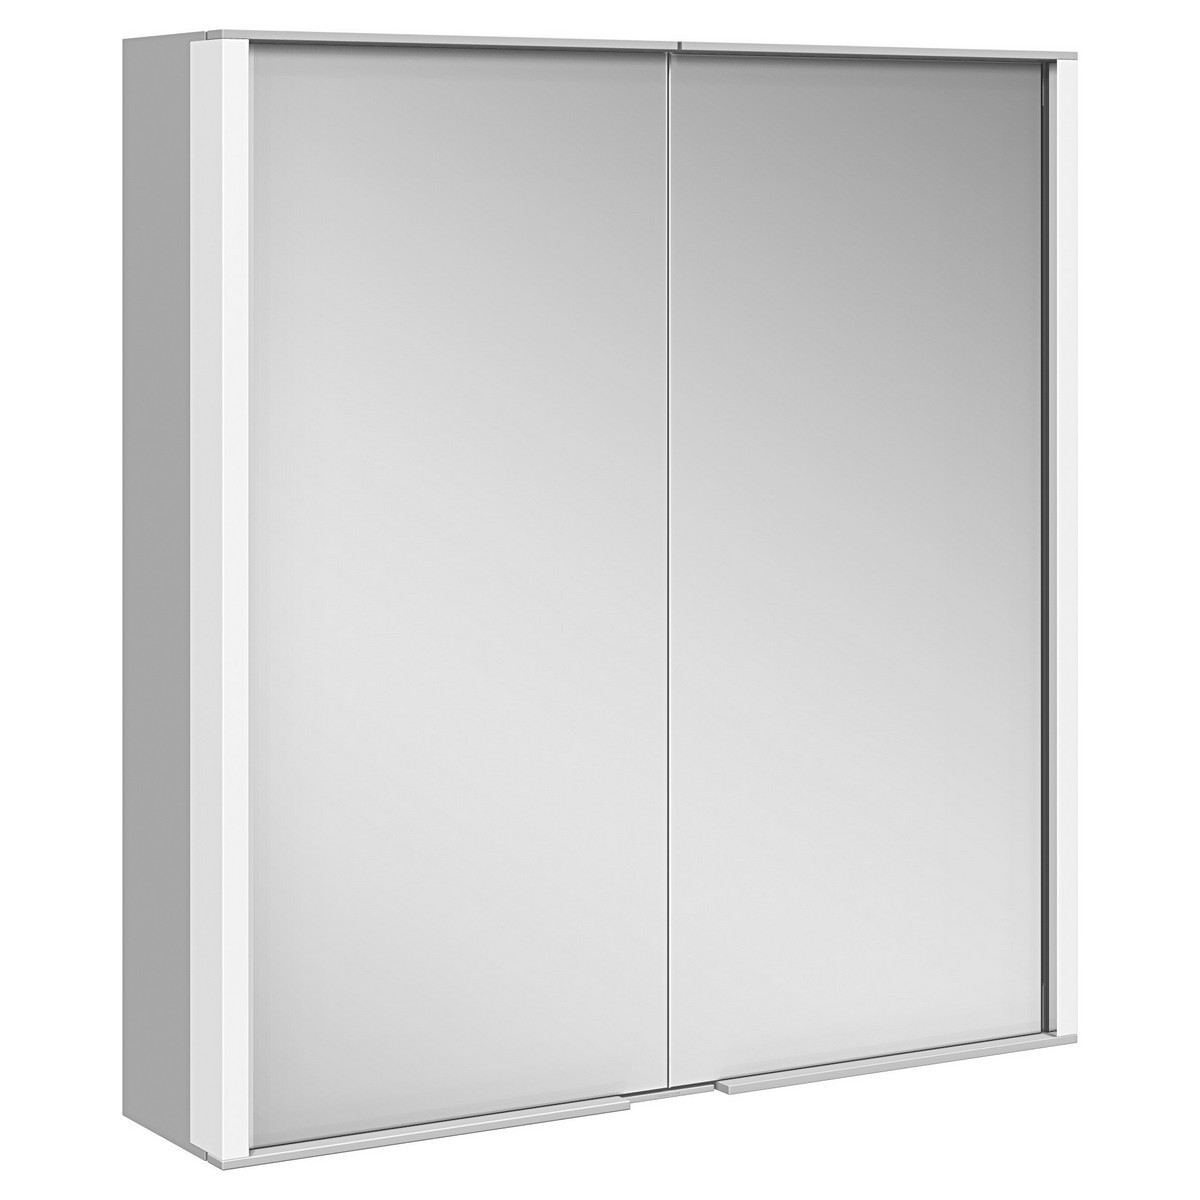 KEUCO 12801171351 ROYAL MATCH 25 5/8 W X 6 1/4 D X 27 1/2 H INCH 2-DOOR 3000K LED WALL MOUNTED MIRROR MEDICINE CABINET IN ALUMINUM